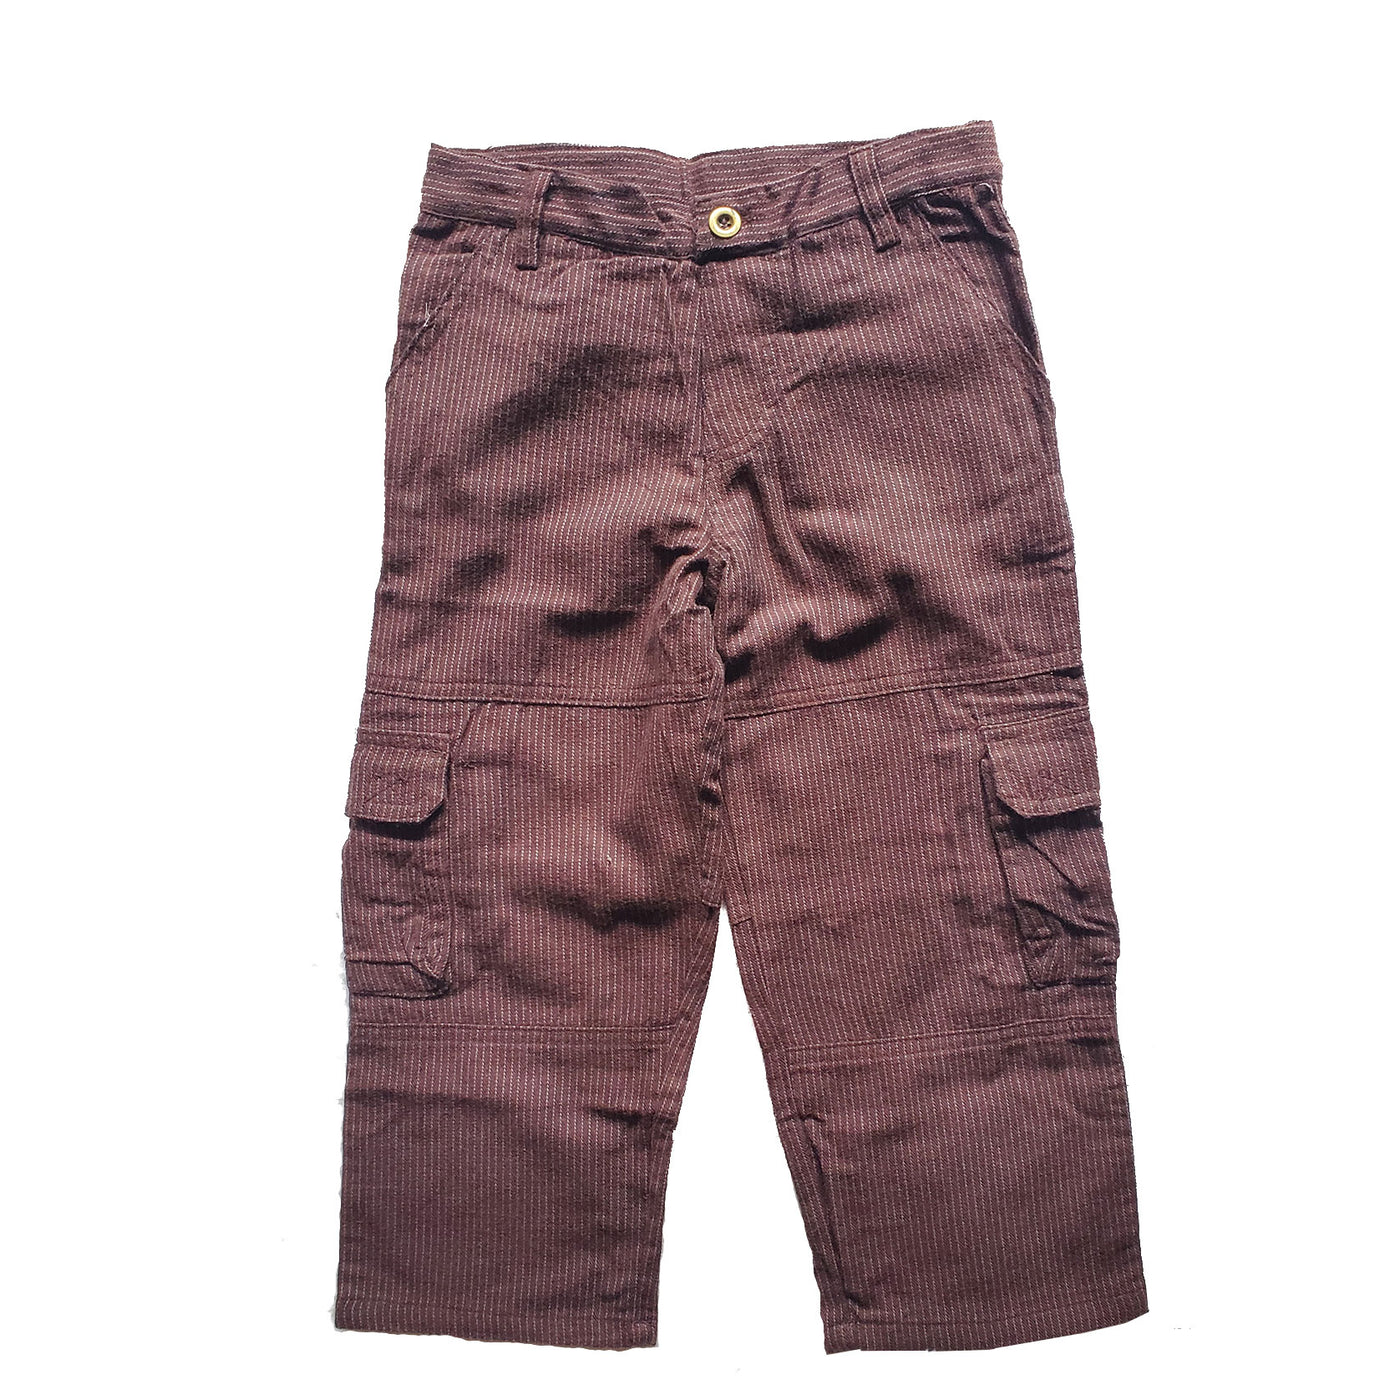 Little Boys' Stripe Flannel Constructed Cargo Pant by Mulberribush